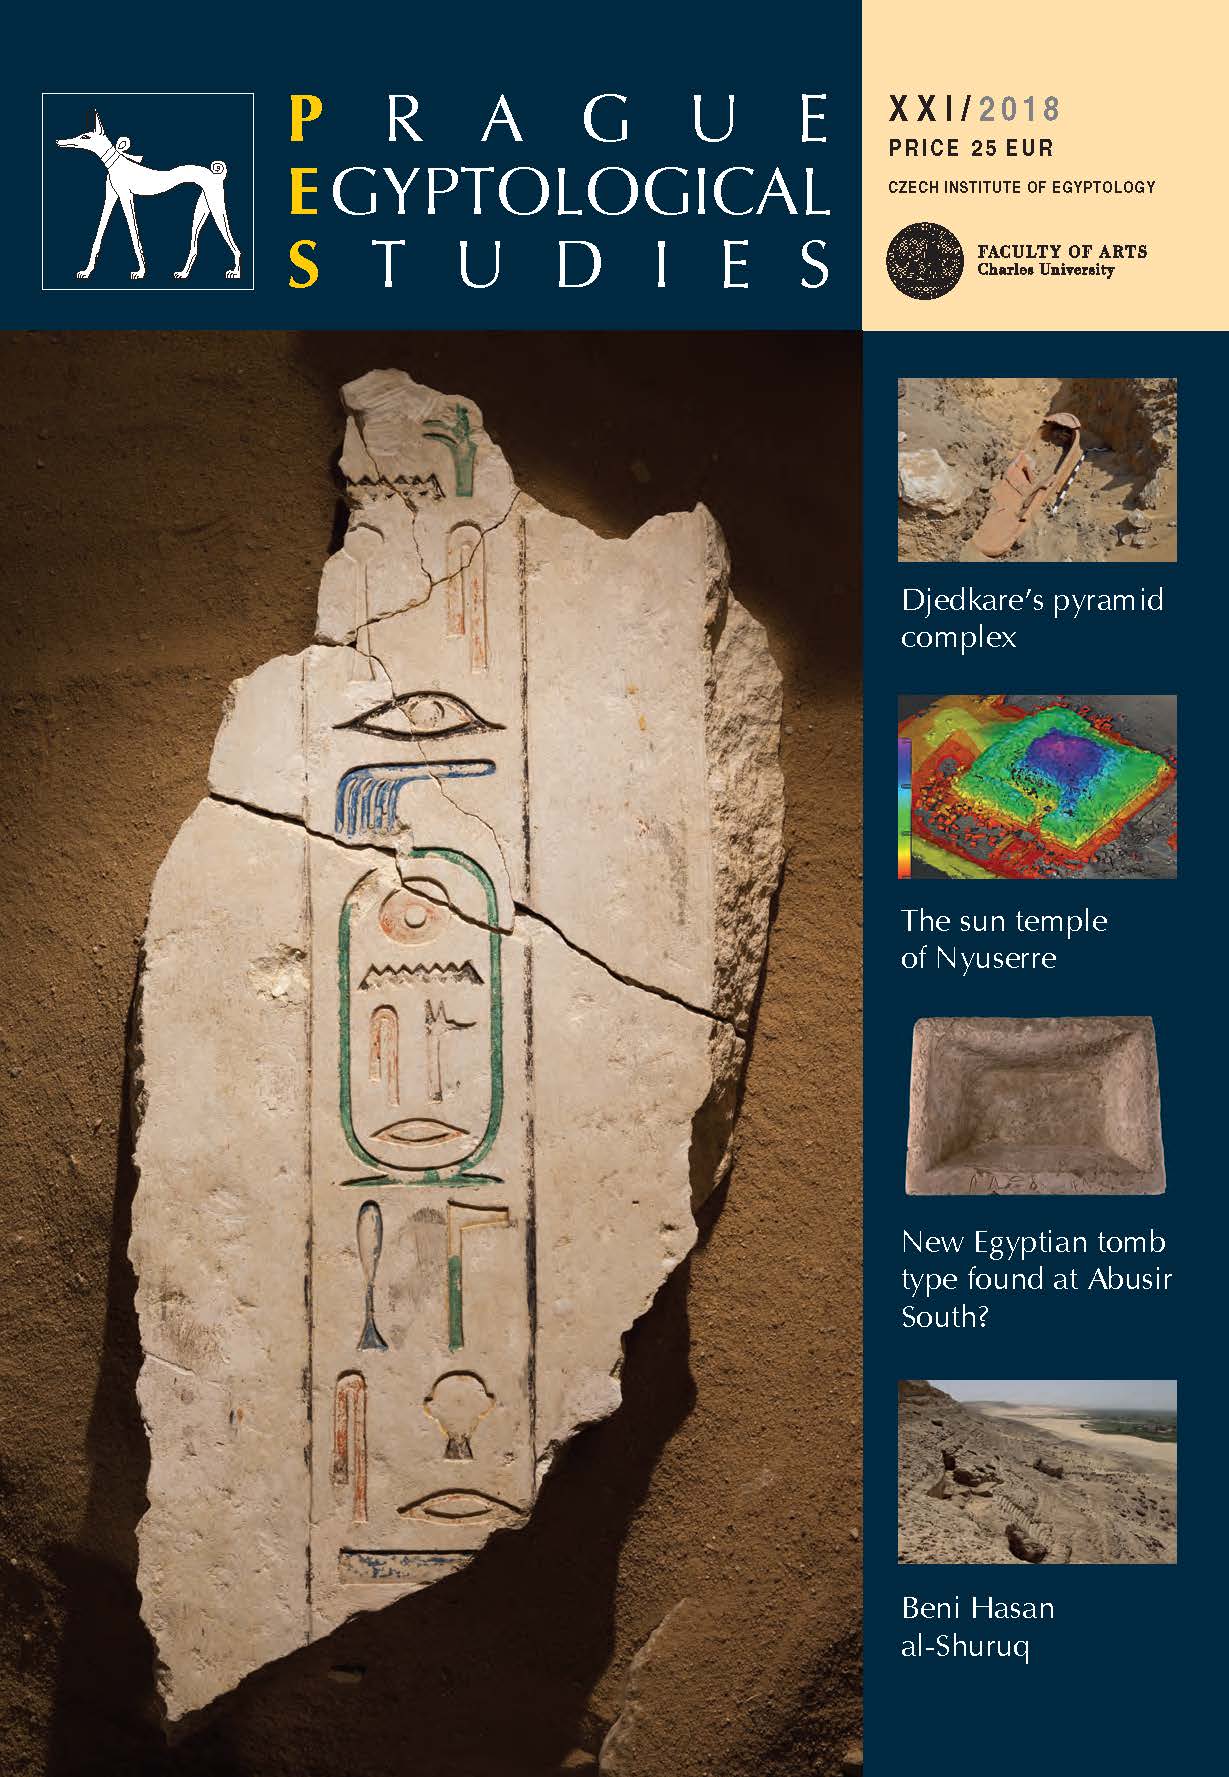 New Egyptian tomb type found at Abusir South? Report on the excavations of mud brick complex AS 103 Cover Image